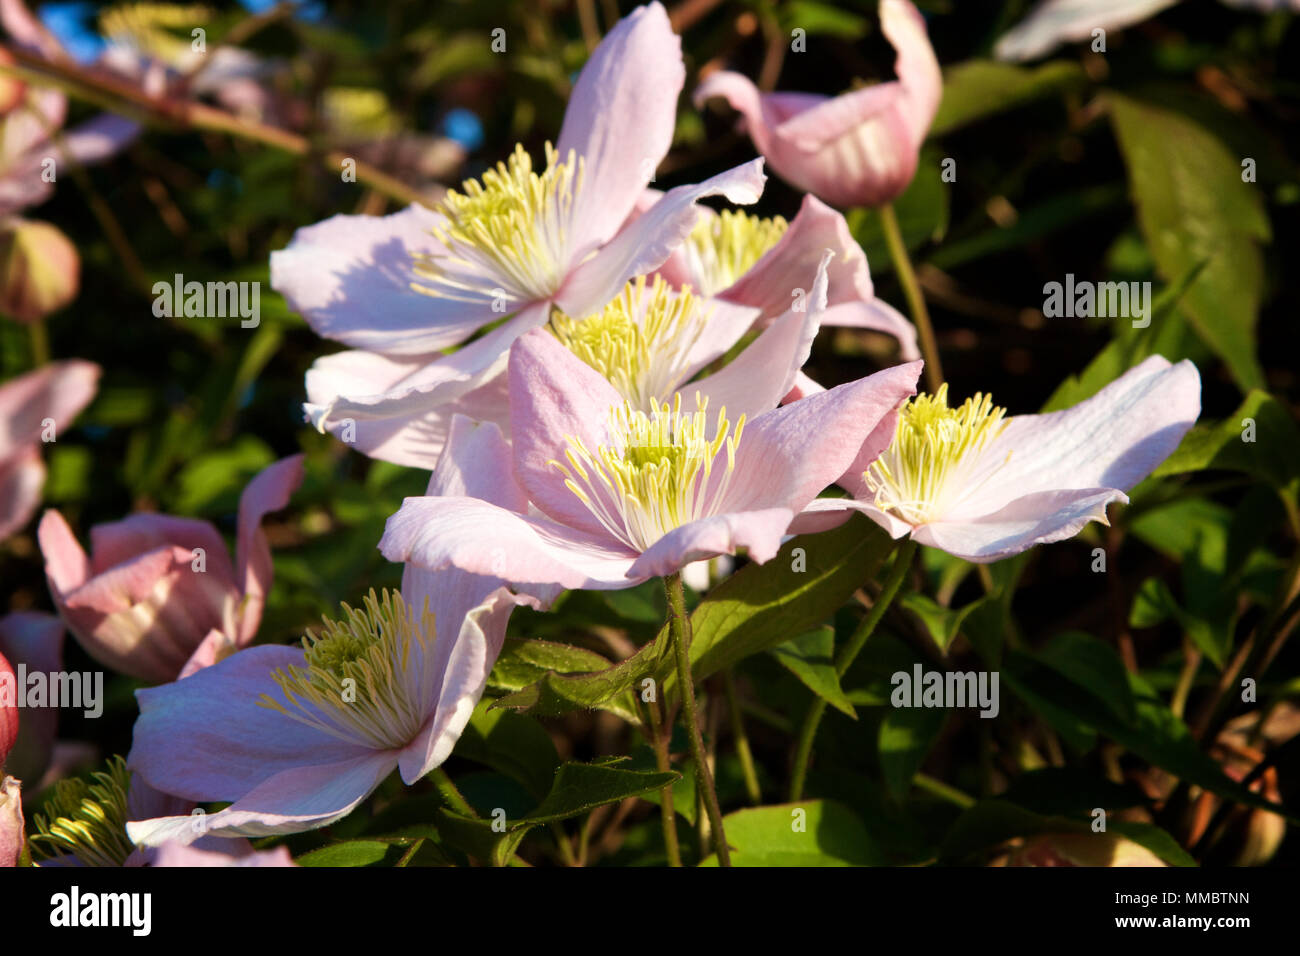 A Clematis Montana climbing plant with flowers in full bloom with pink petals and yellow stamen set against green leaves taken on a sunny late Spring Stock Photo